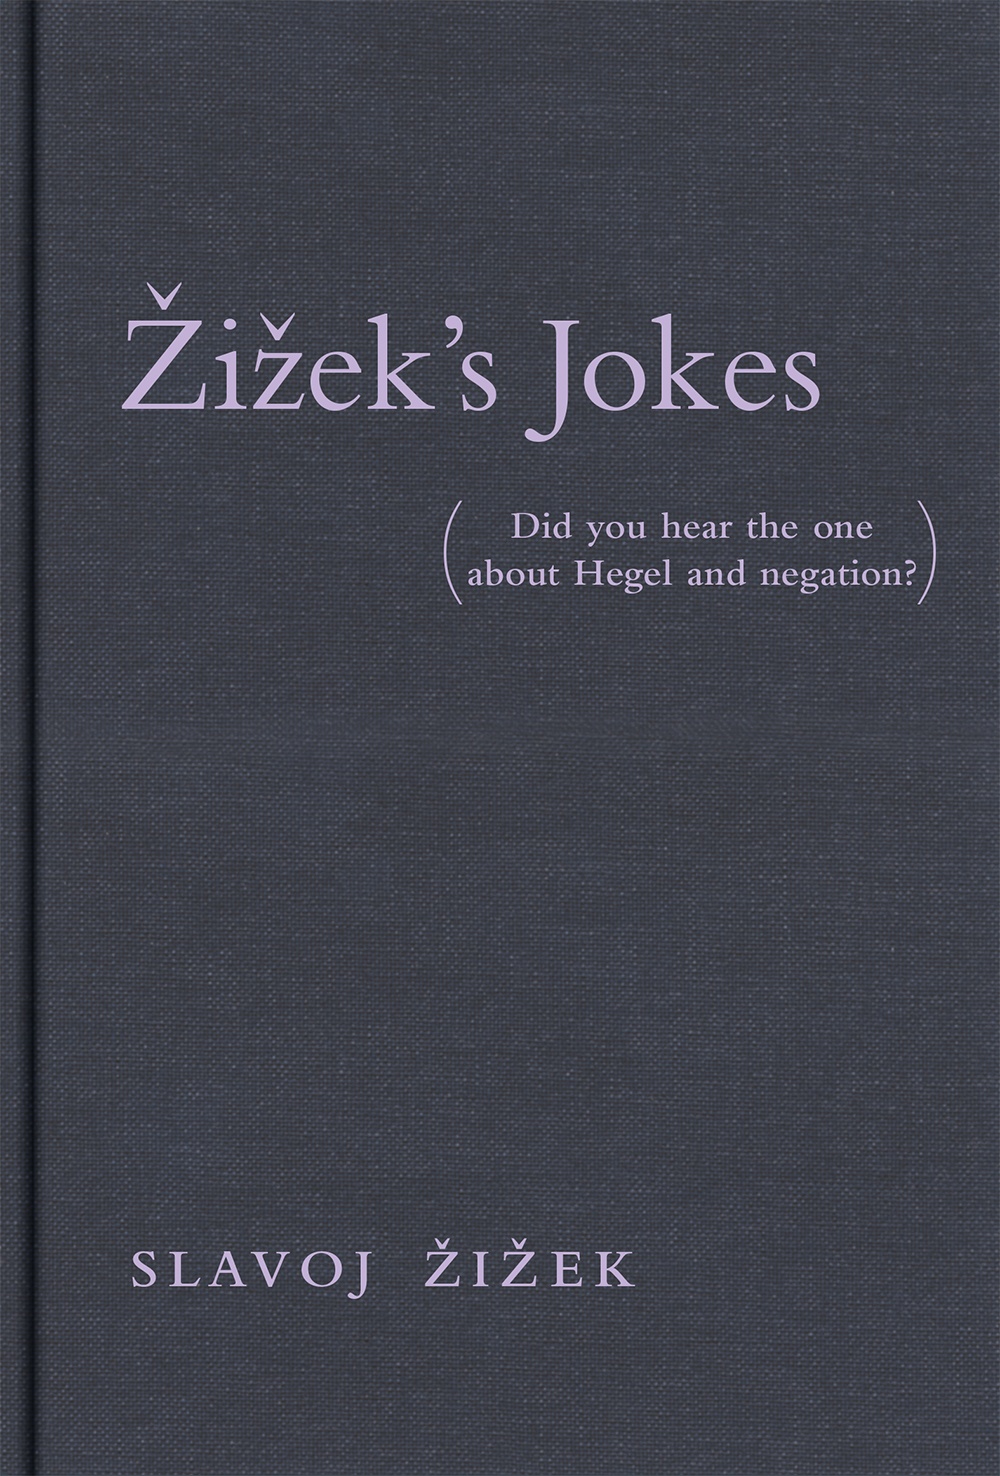 Žižek’s Jokes(Did you hear the one about Hegel and negation?)